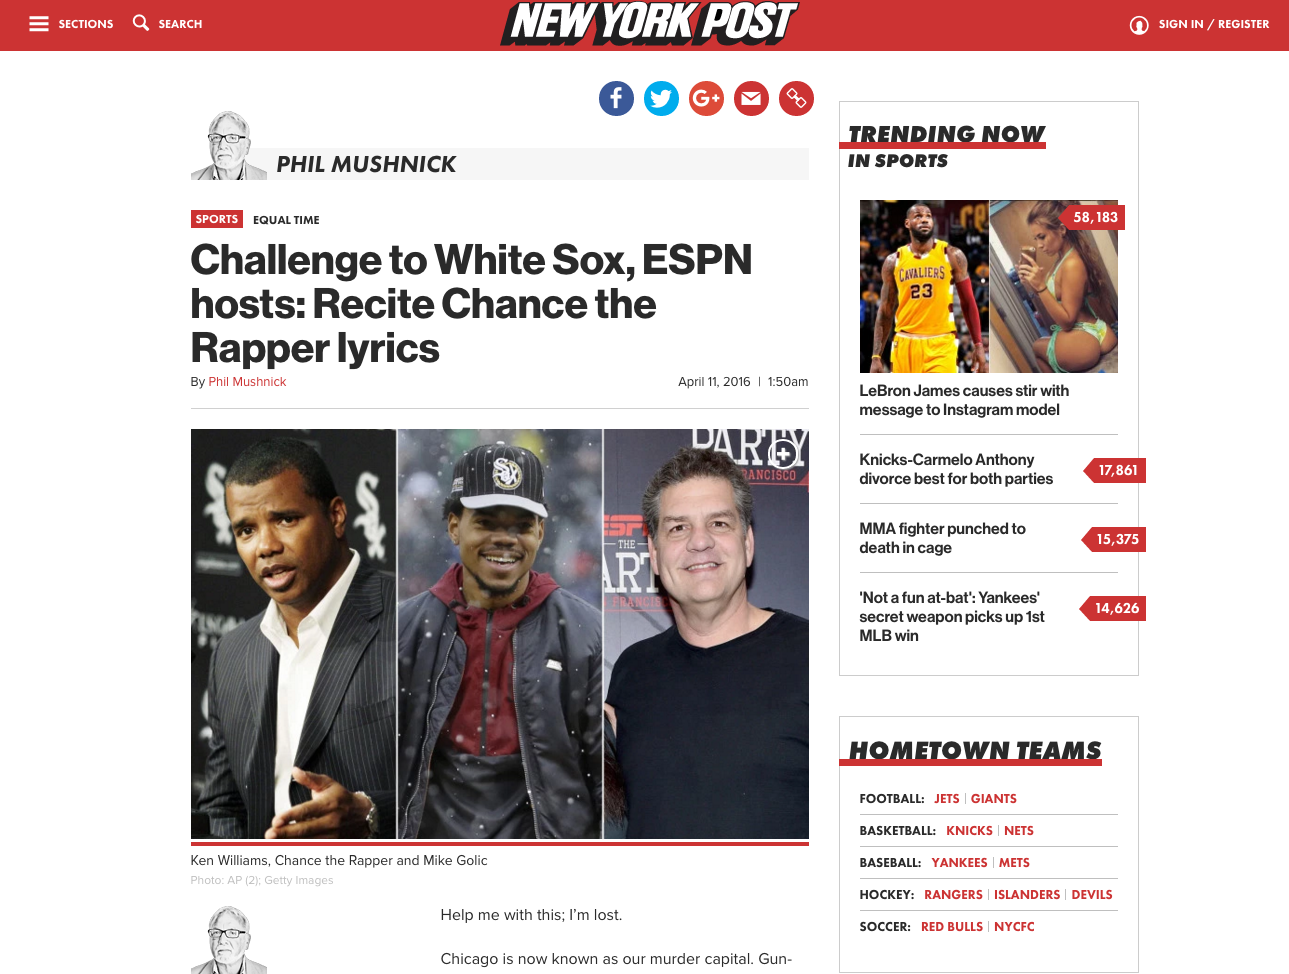 NY Post - Chance The Rapper - Phil Mushnick